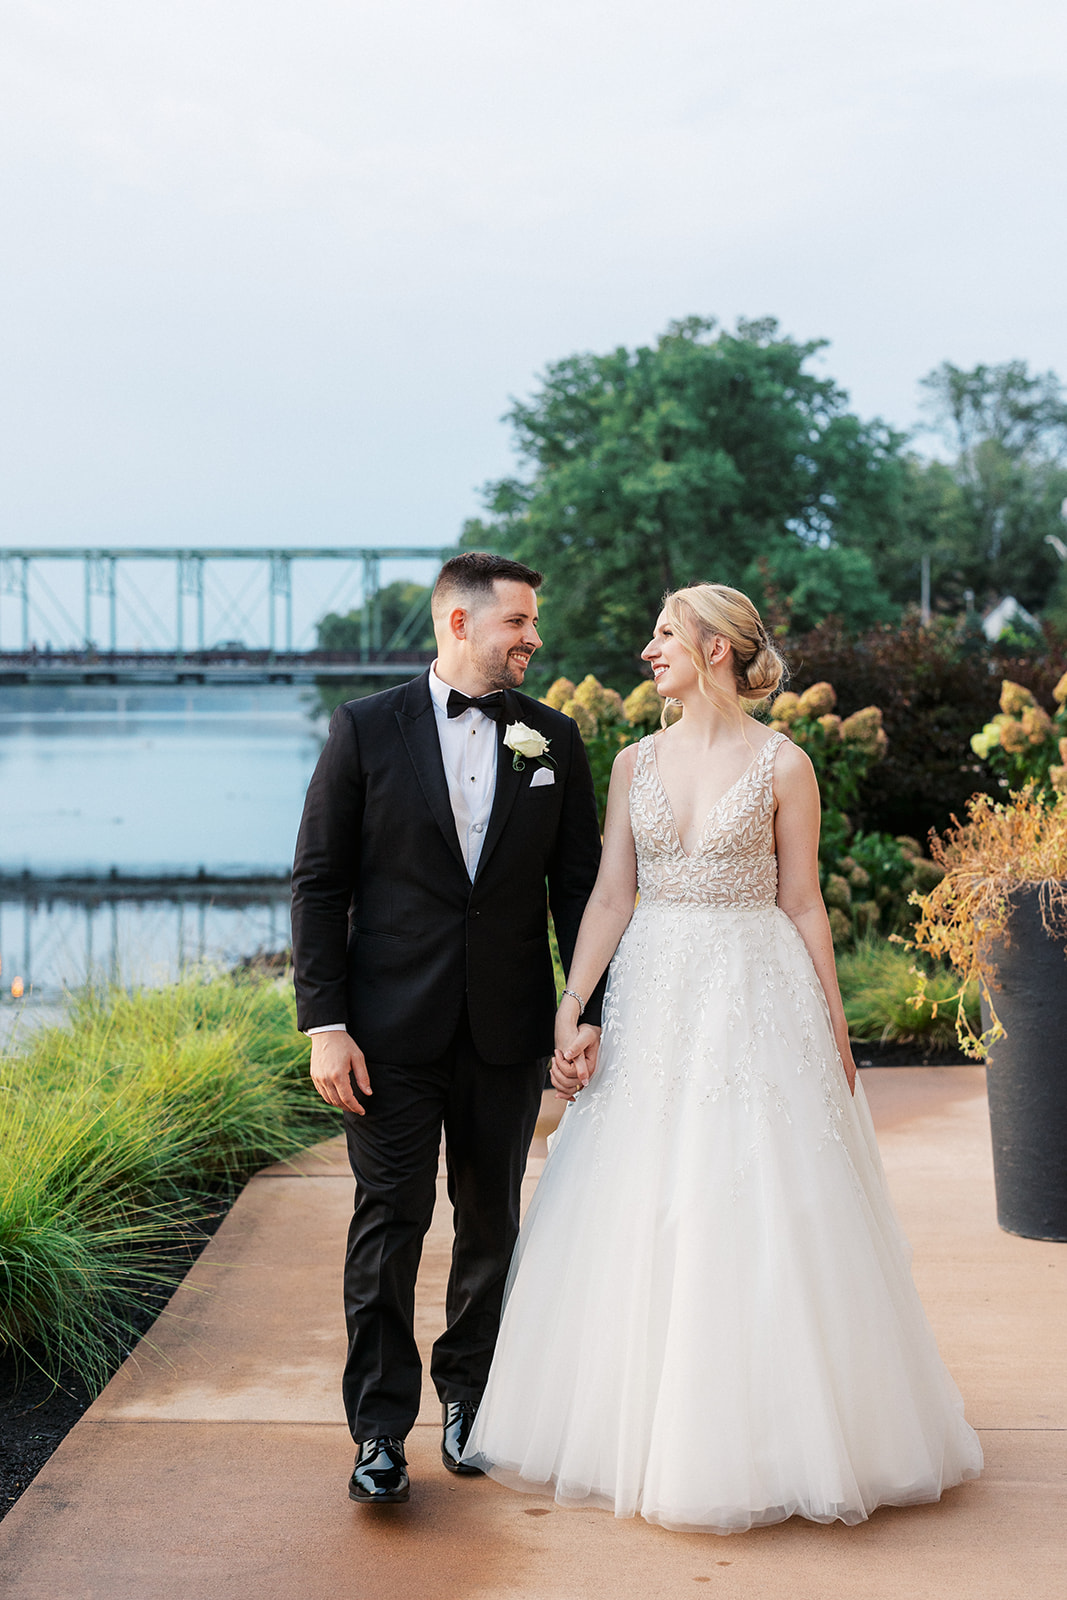 Newlyweds smile at each other while holding hands and walking through a riverfront garden